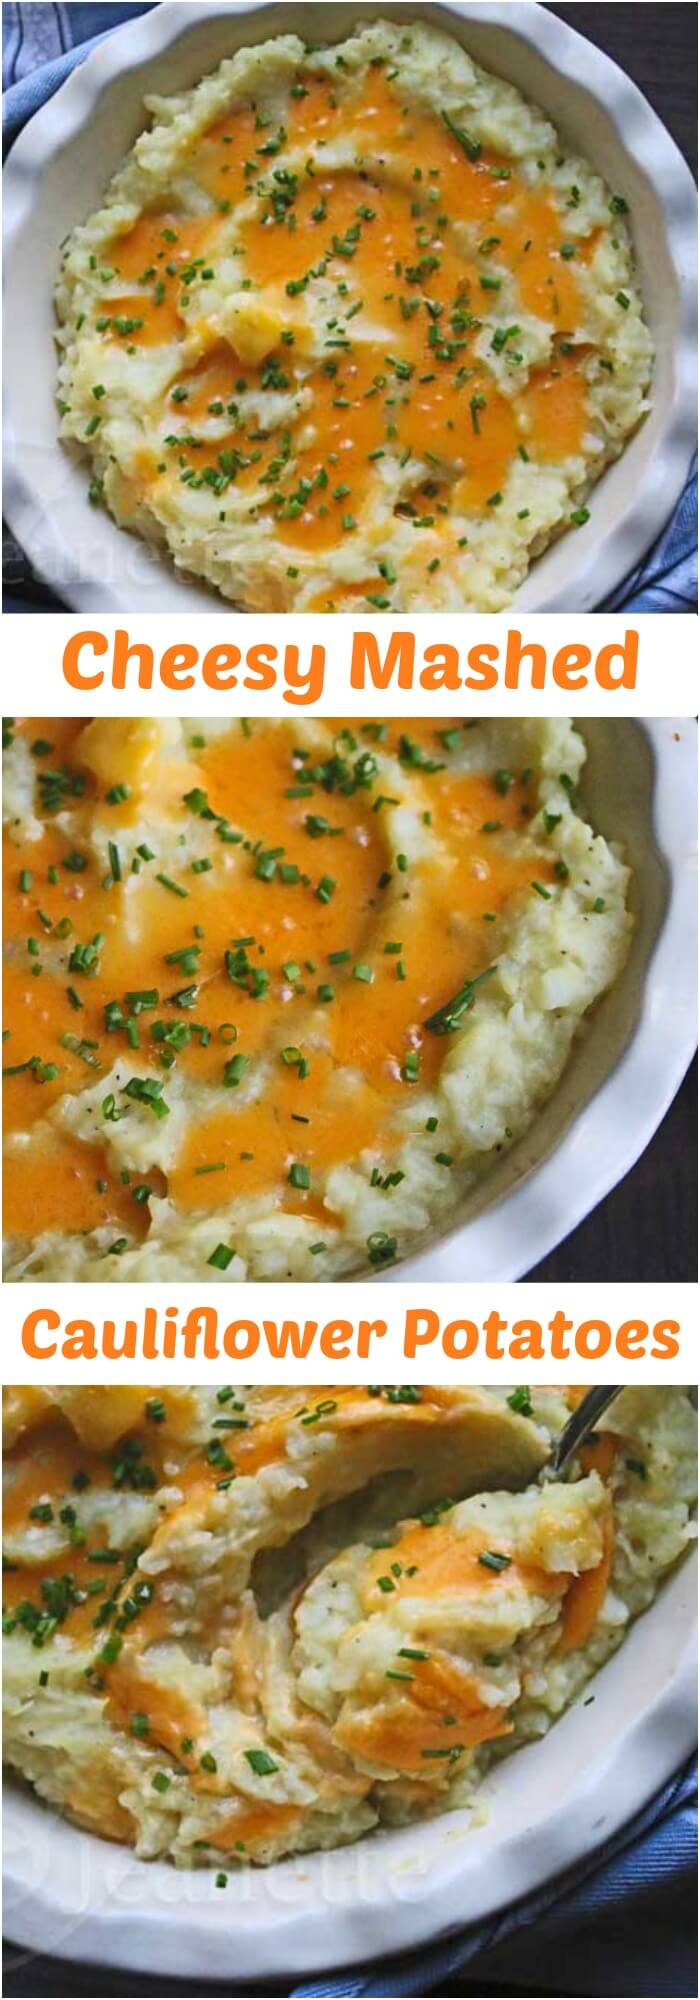 Cheddar Mashed Cauliflower Potatoes - this lower carb, lower fat version of mashed potatoes tastes so decadent, no one will know it's lighter and healthier